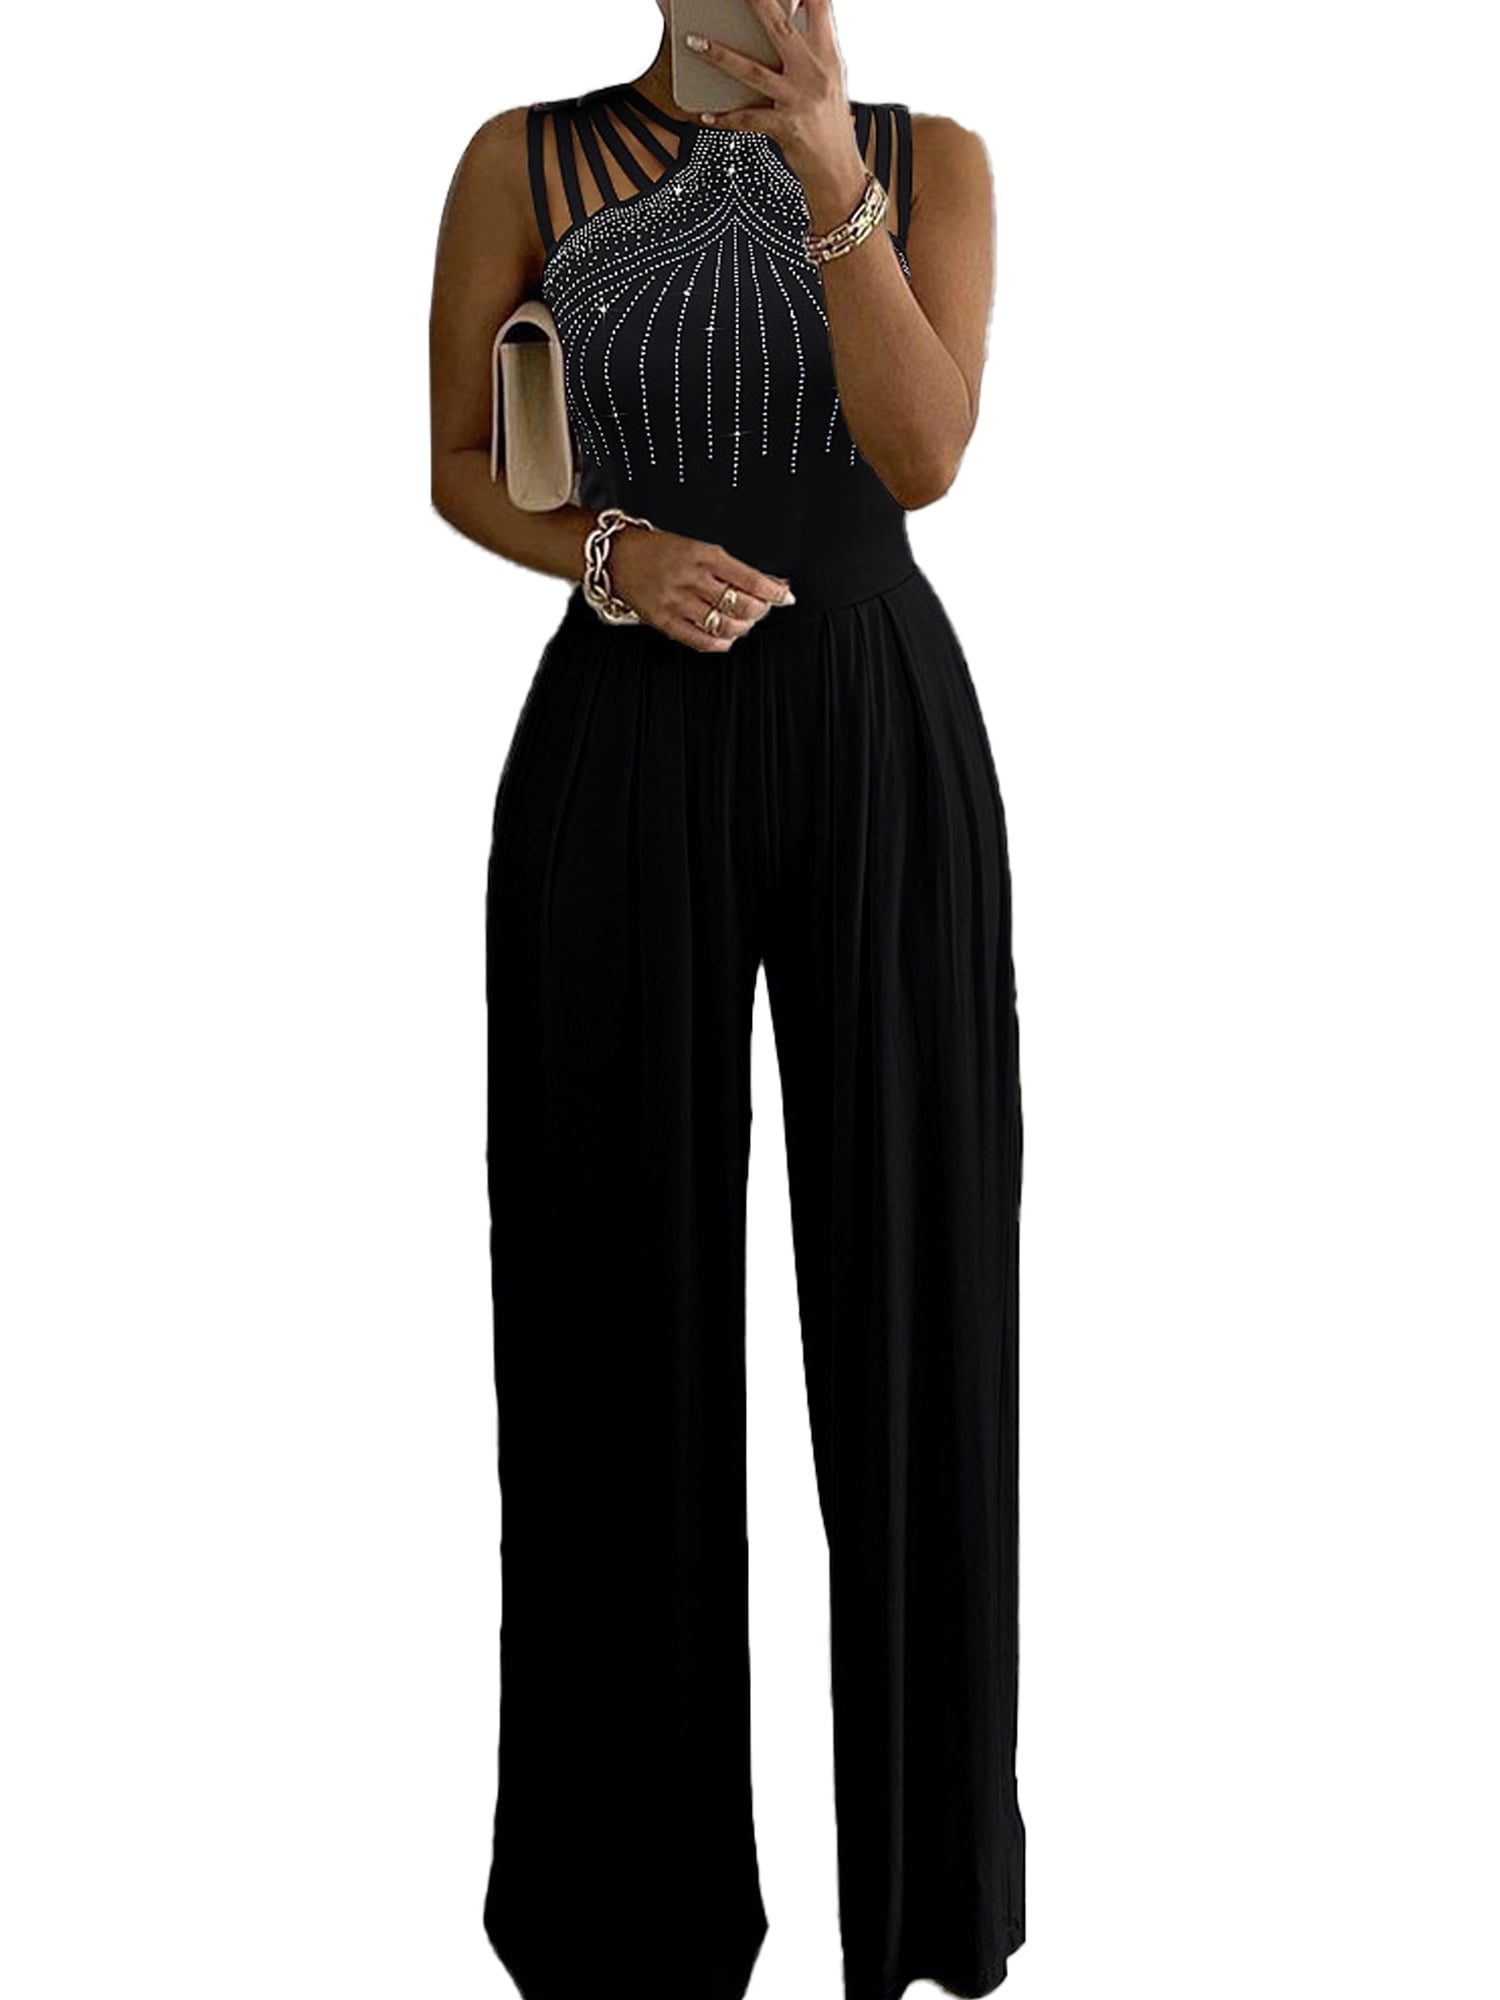 Julycc Womens Sequin Jumpsuit Sleeveless Wide Leg Formal Evening Party  Playsuit Pants 